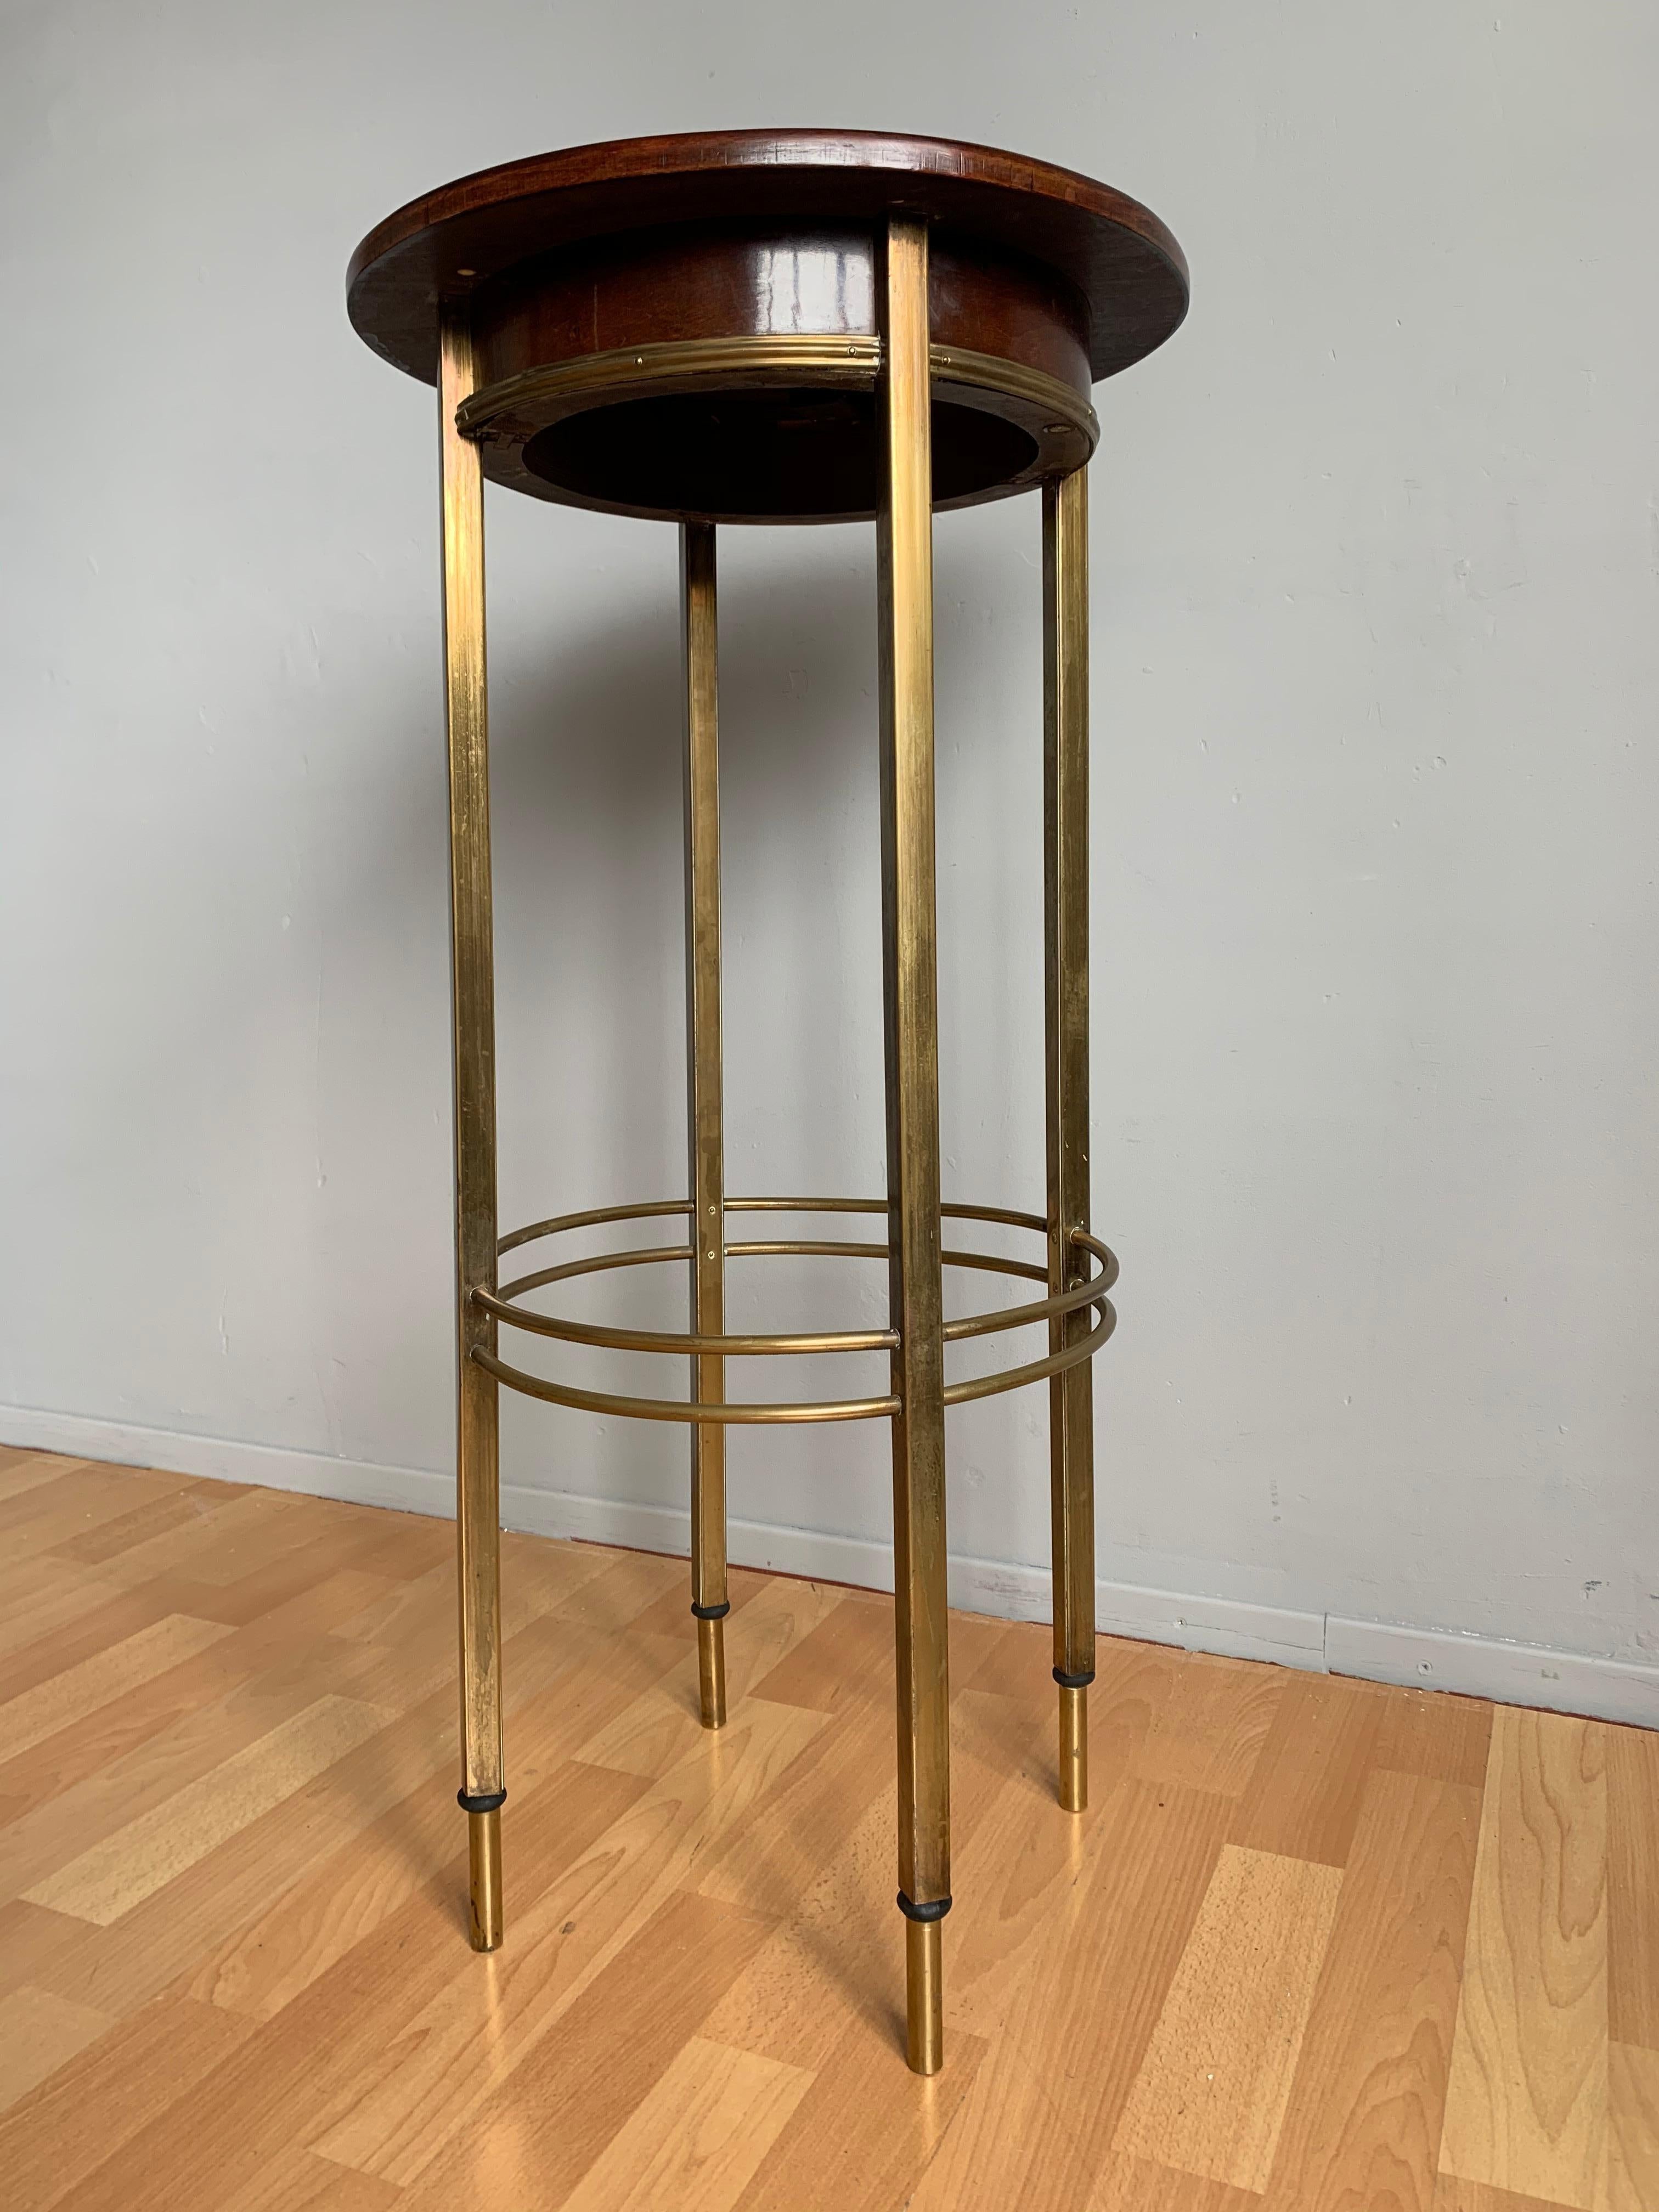 Arts and Crafts Viennese Secession Brass and Wood Pedestal or Display Stand by Ernst Rockhausen